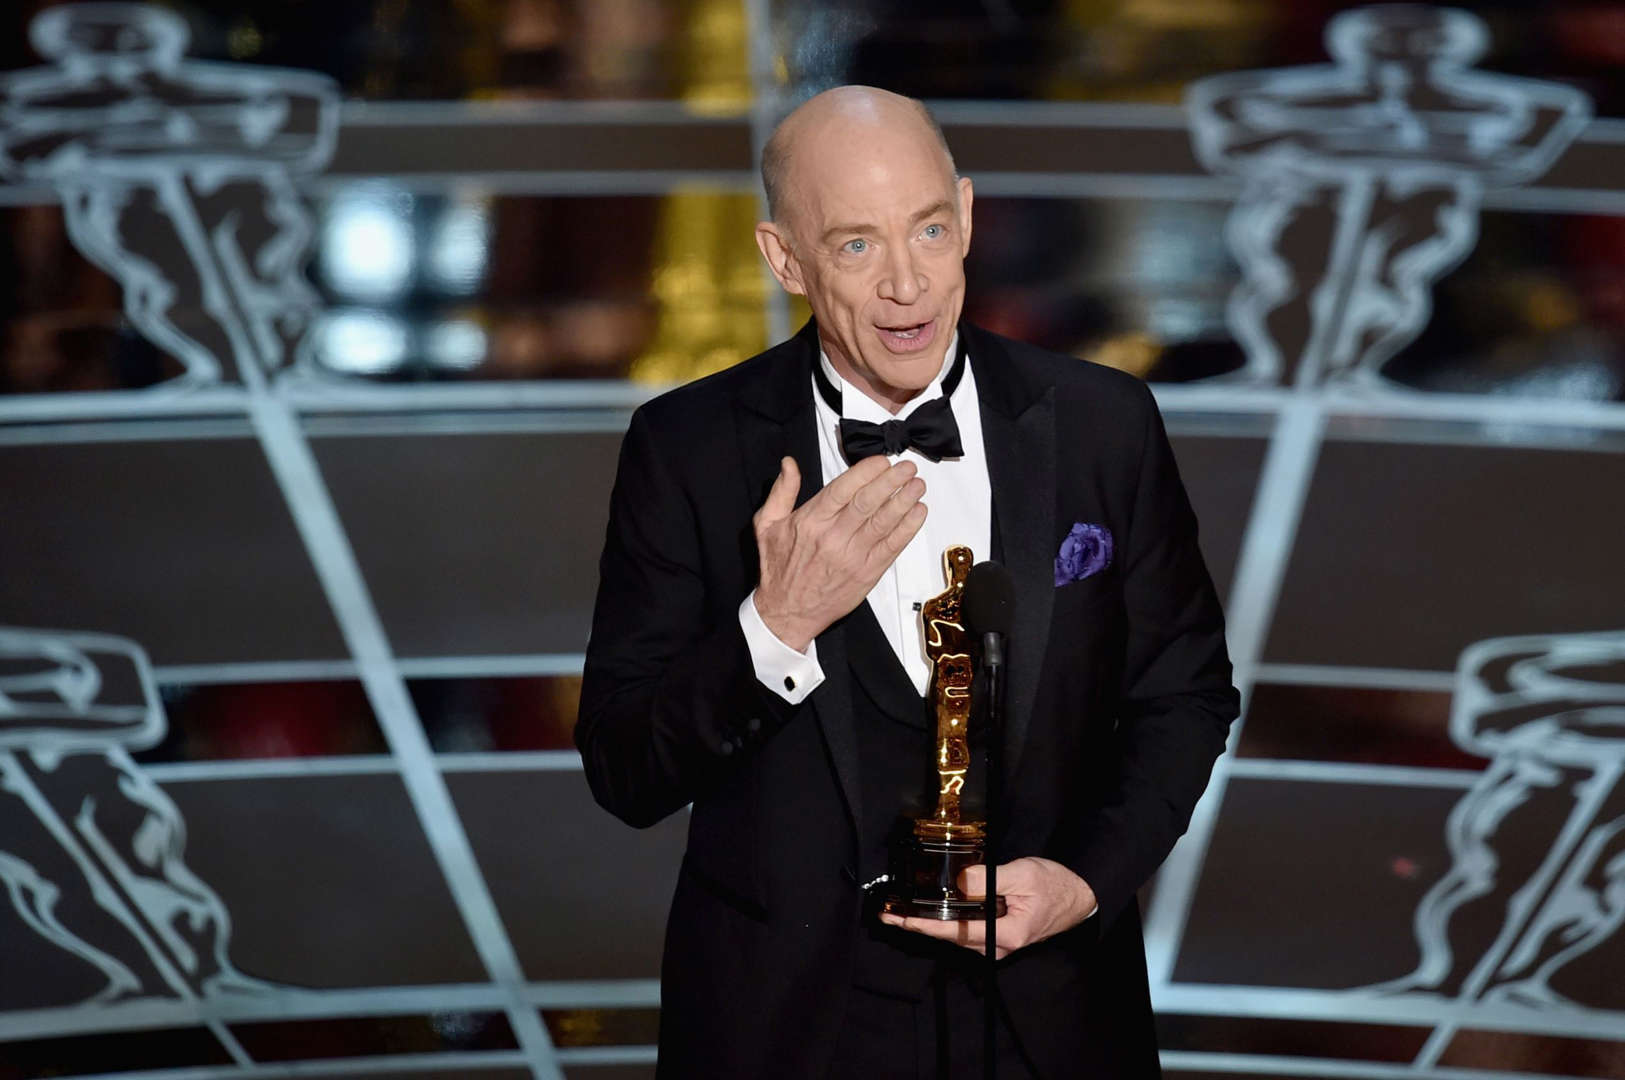 HOLLYWOOD, CA - FEBRUARY 22:  Actor J.K. Simmons accepts the Actor in a Supporting Role Award for "Whiplash" onstage during the 87th Annual Academy Awards at Dolby Theatre on February 22, 2015 in Hollywood, California.  (Photo by Kevin Winter/Getty Images)